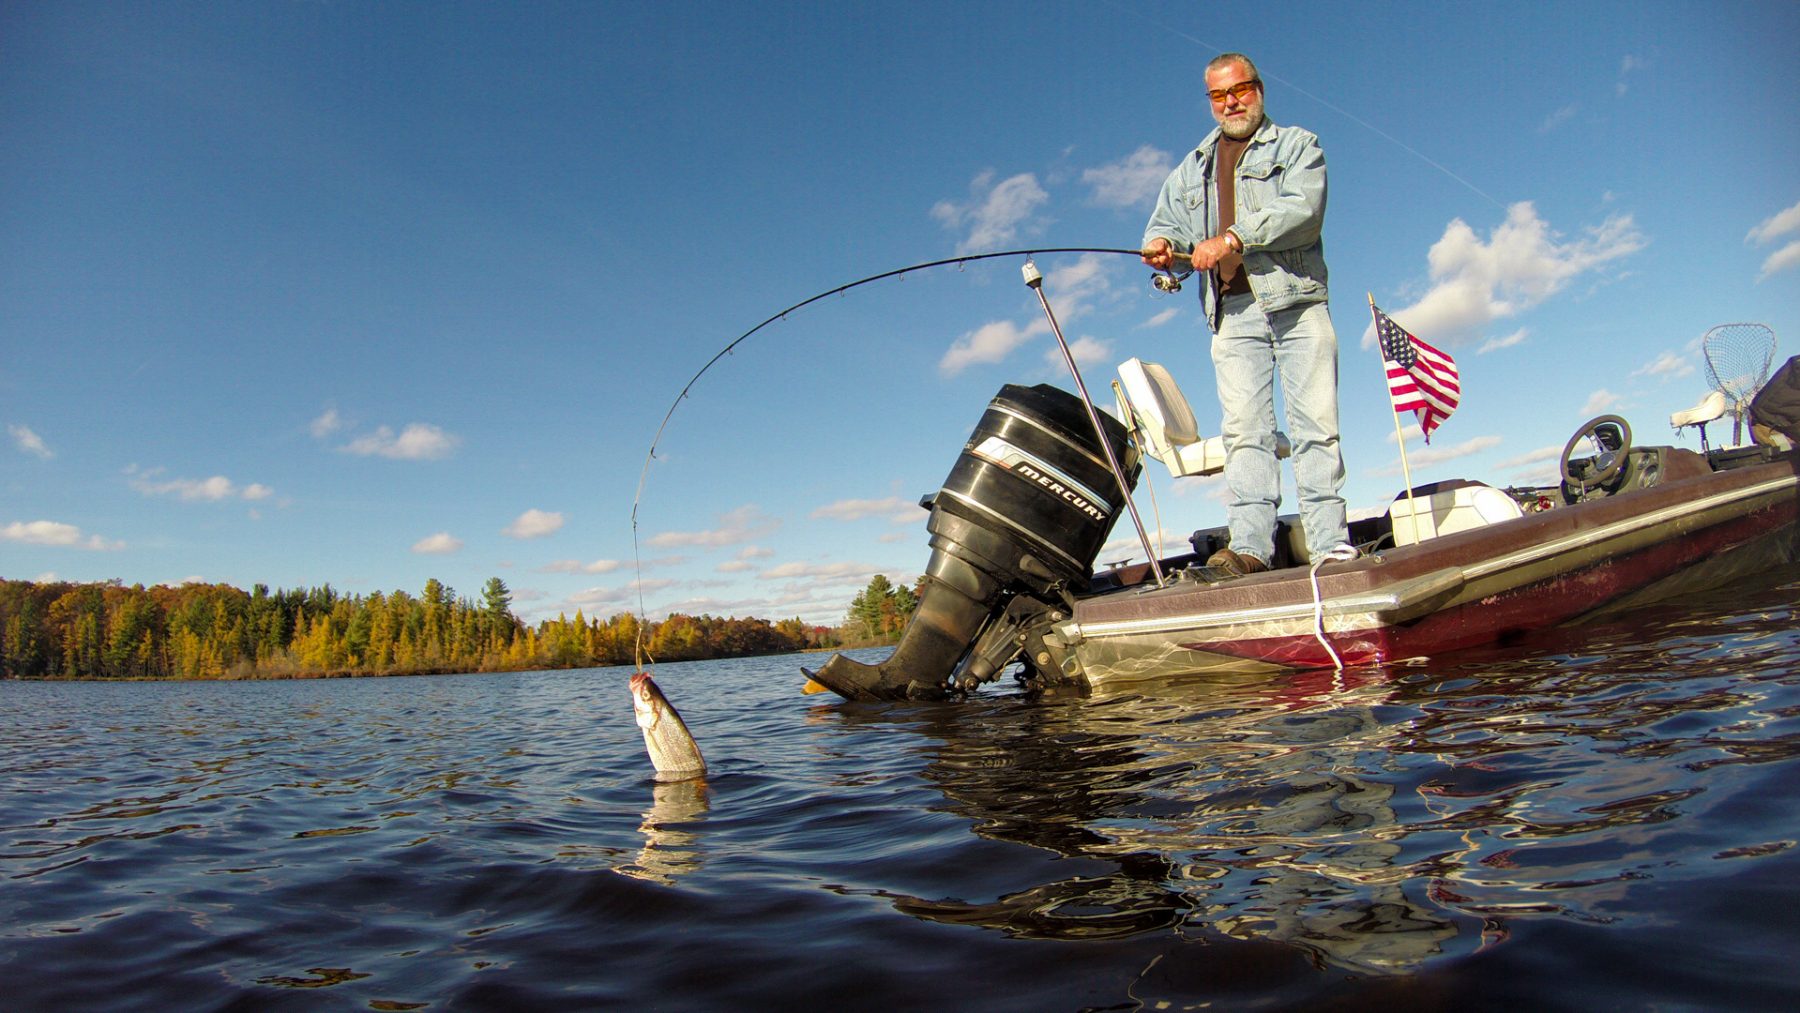 Article: Wisconsin’s best bass fishing lakes and rivers